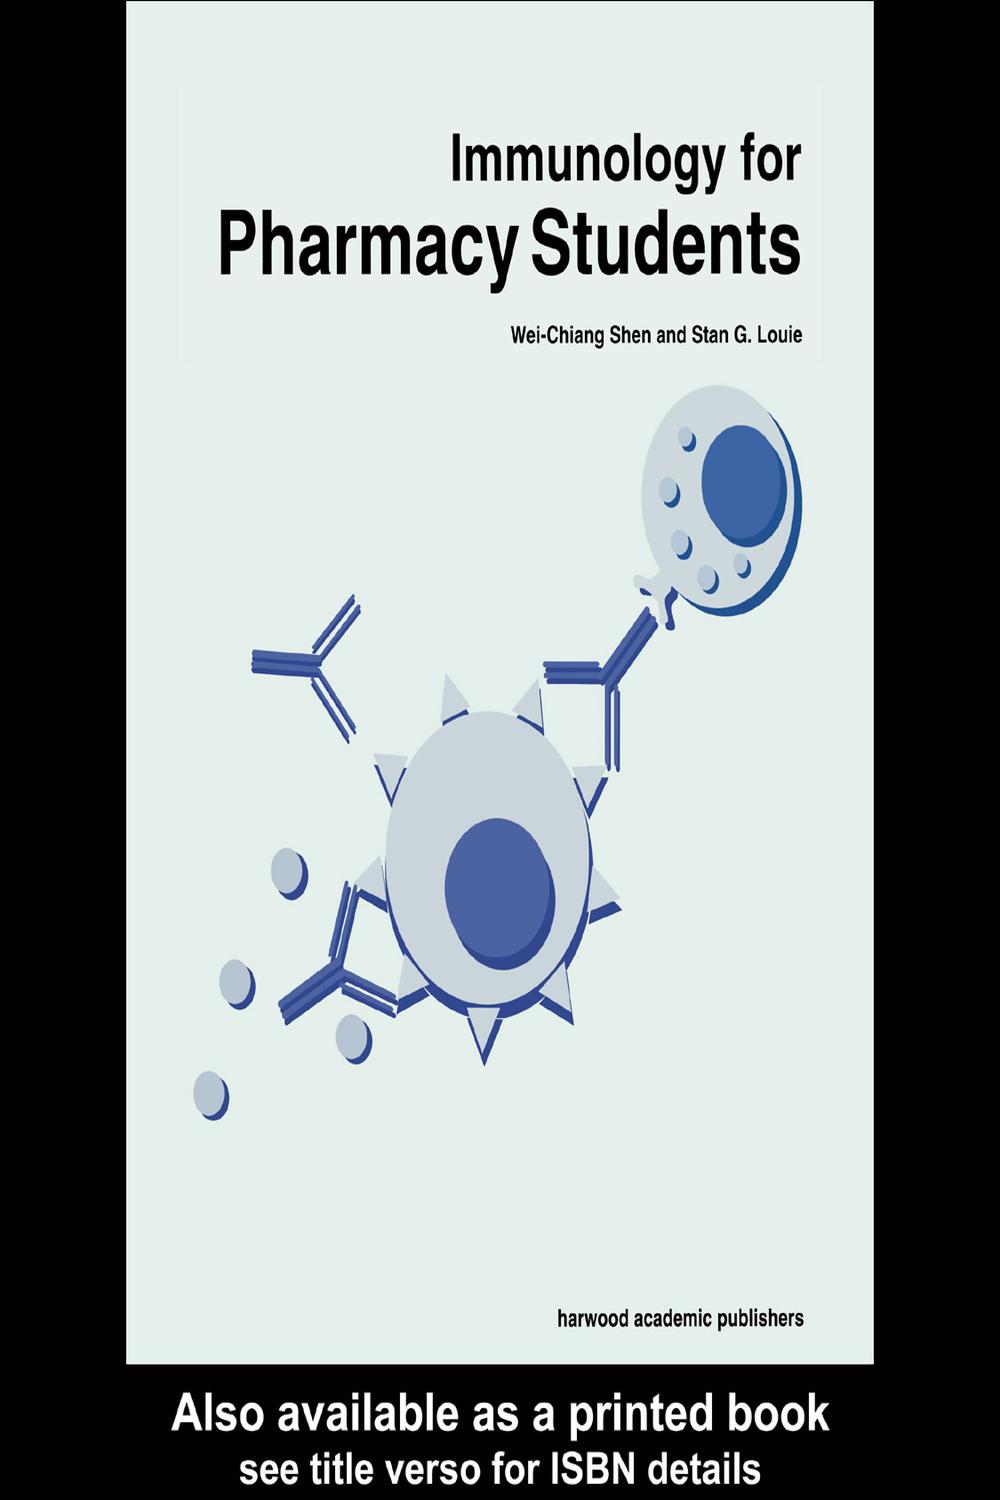 Immunology for Pharmacy Students - Wei-Chiang Shen, Stan G. Louie